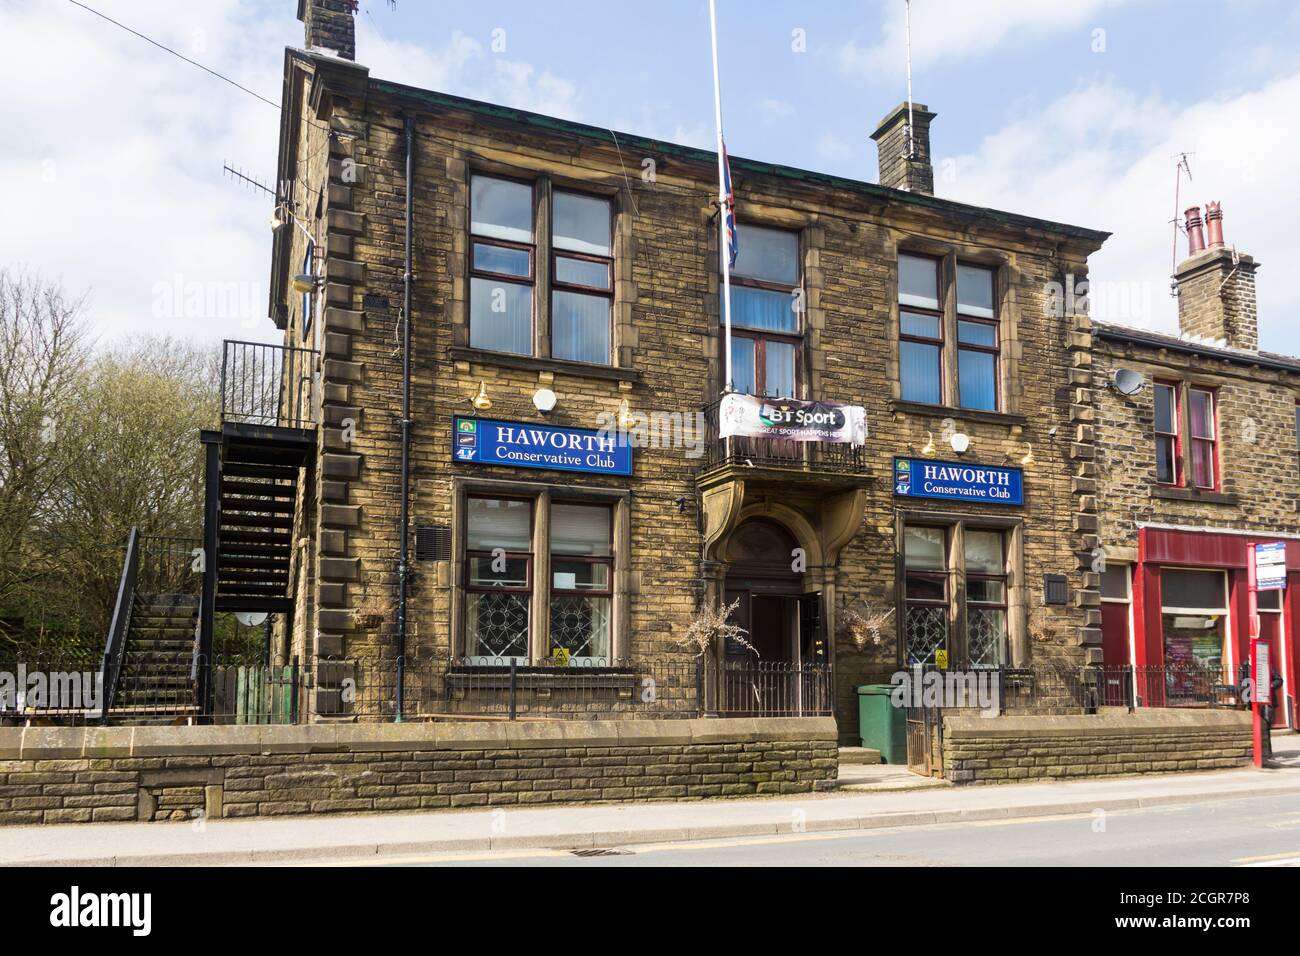 Conservative Club building in Haworth, West Yorkshire. One of a network of social clubs across the UK associated with the main UK political parties. Stock Photo